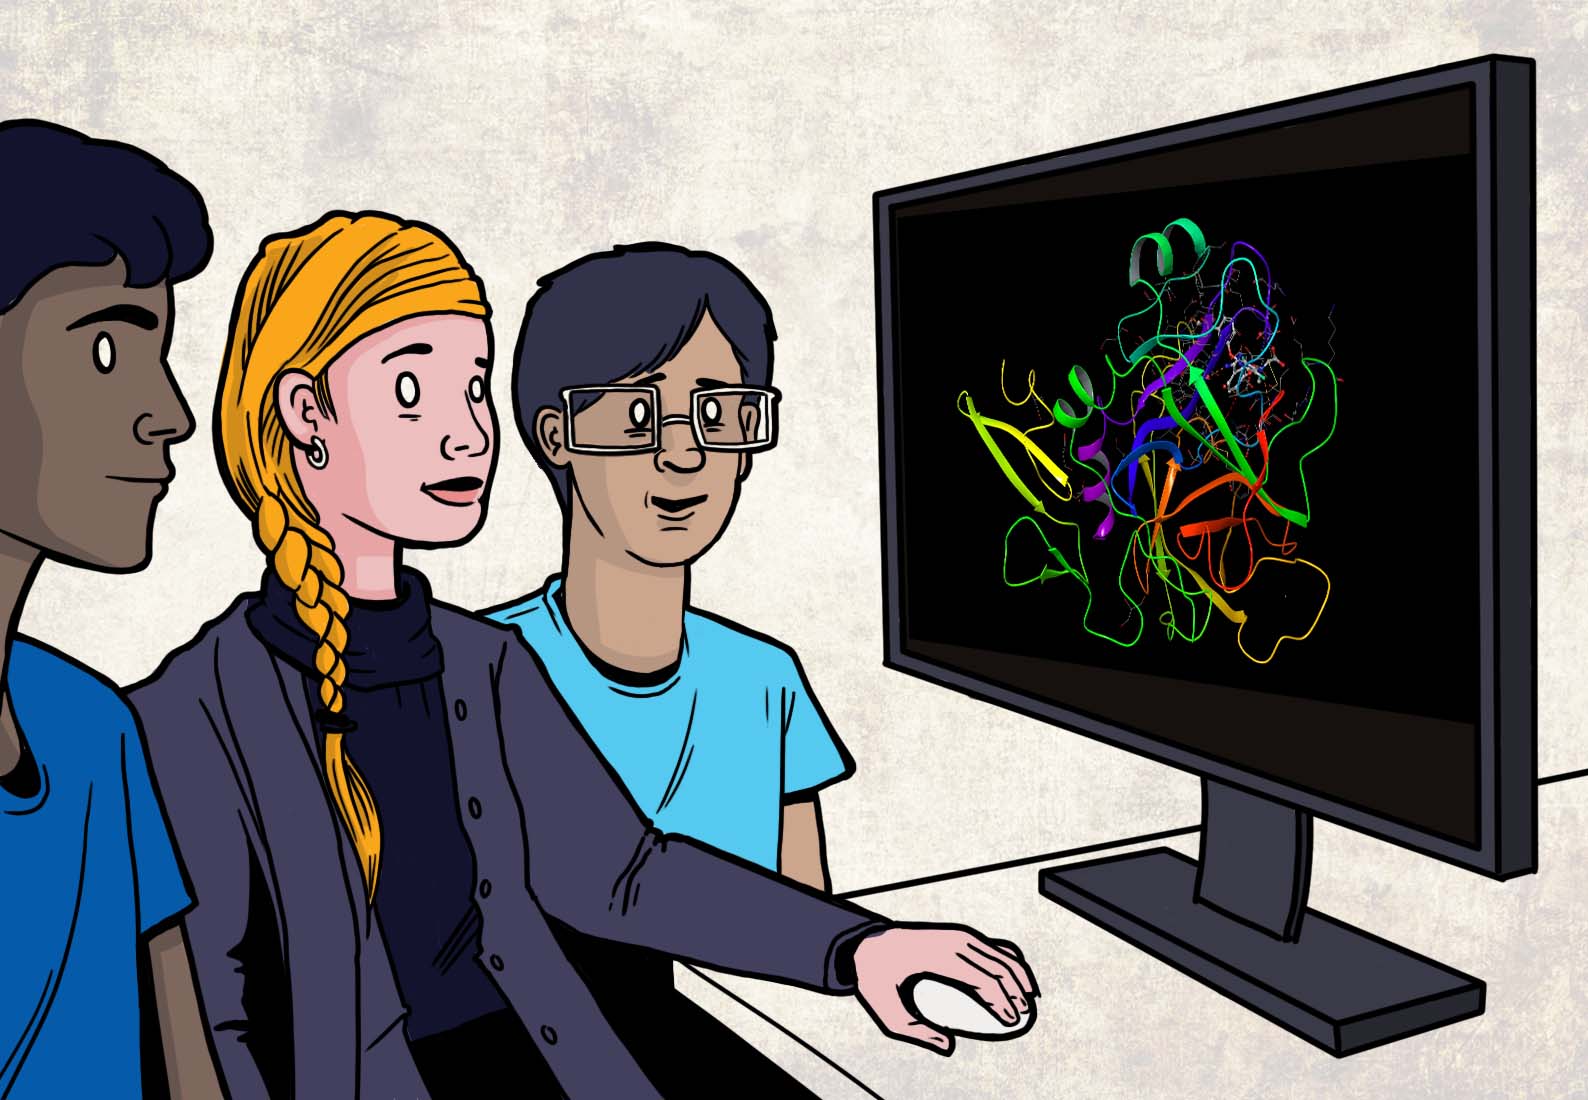 Three high school students equipped with professional-grade physics-based modeling software sit at a computer together, looking at a simulation of a molecule.